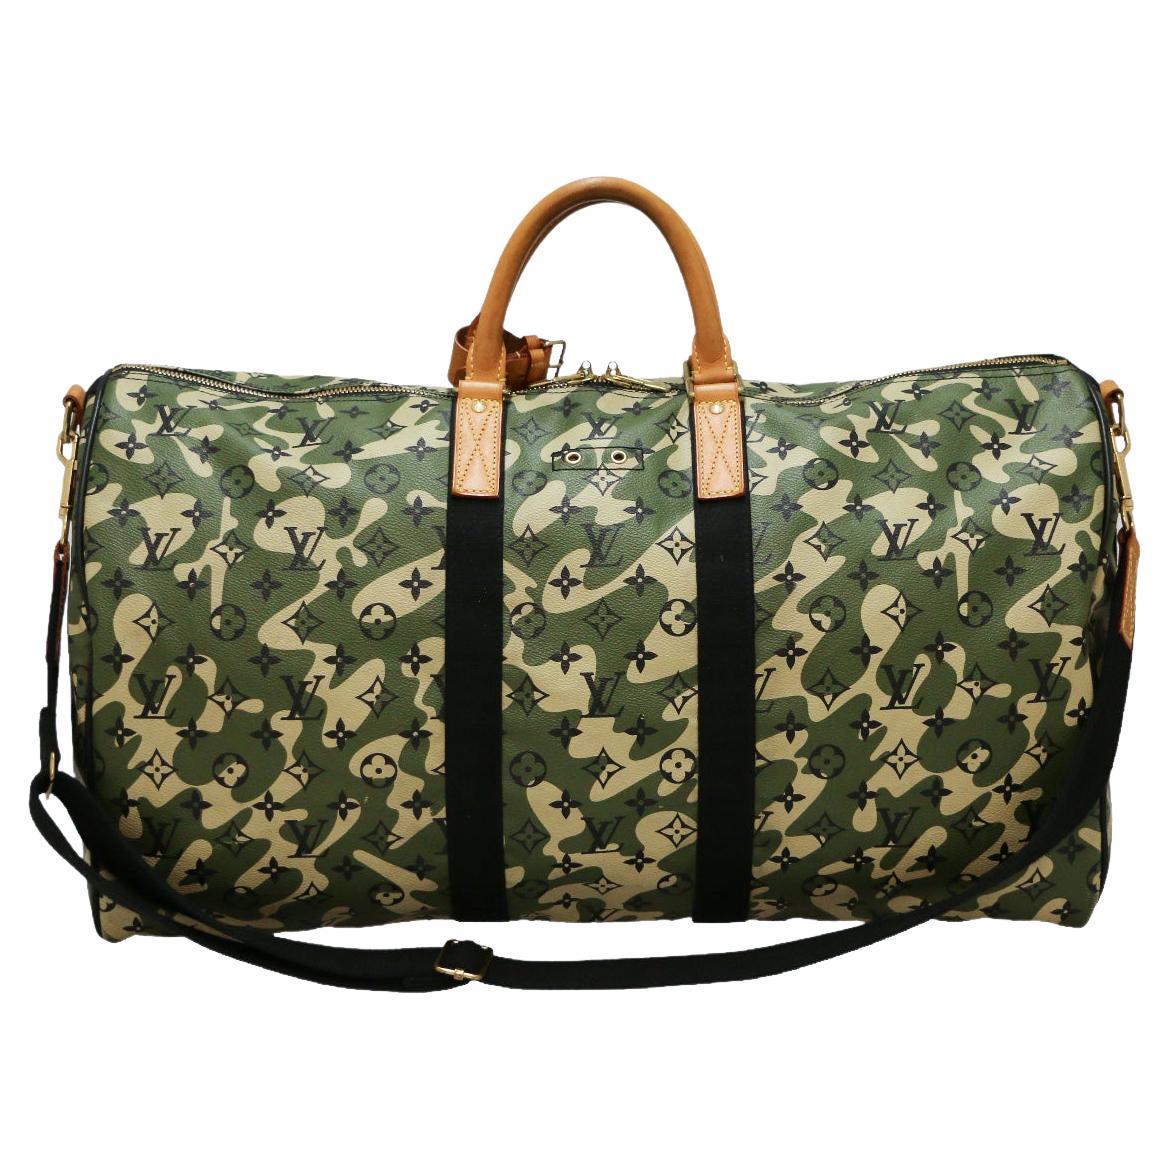 Iridescent Louis Vuitton Duffle Bag - For Sale on 1stDibs